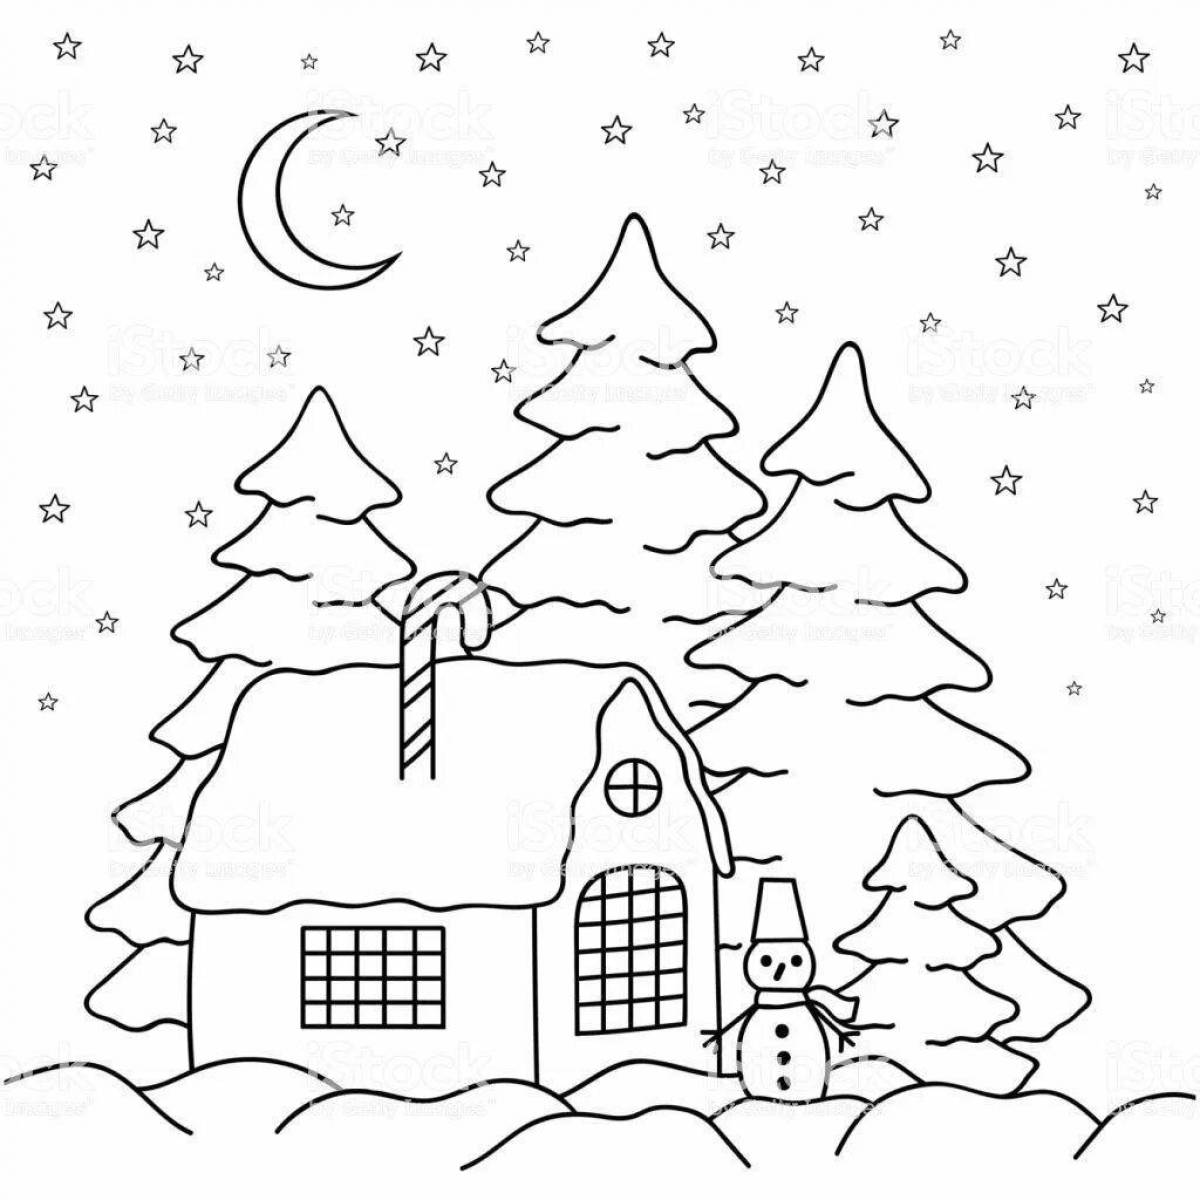 Joyful winter forest coloring pages for kids